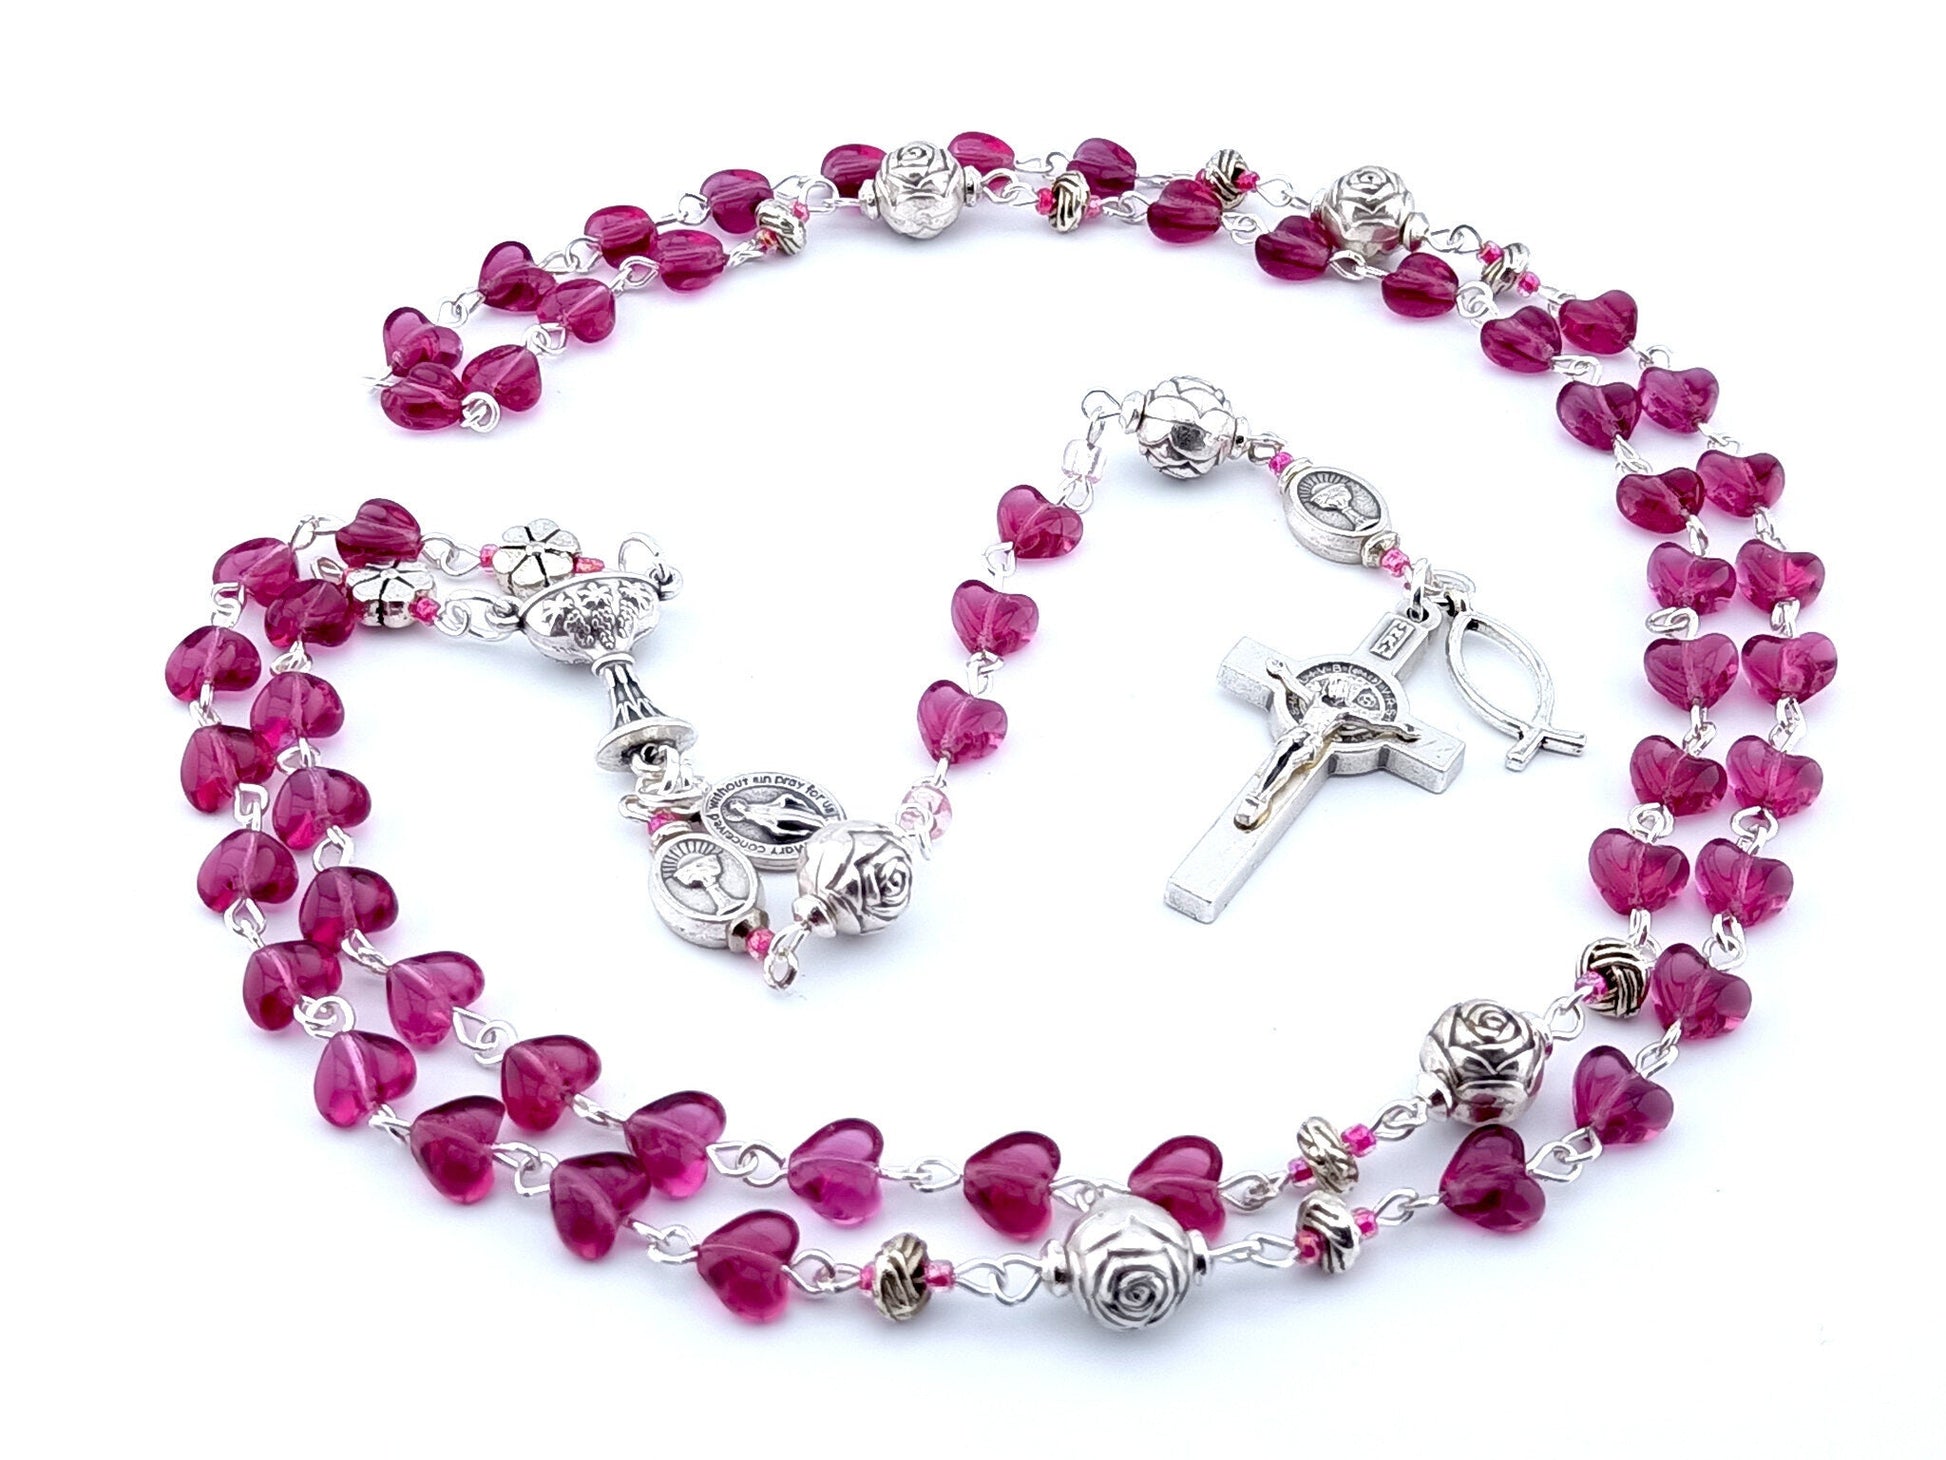 First Holy Communion unique rosary beads with purple heart glass beads, Saint benedict crucifix, silver rose pater beads and chalice centre medal.